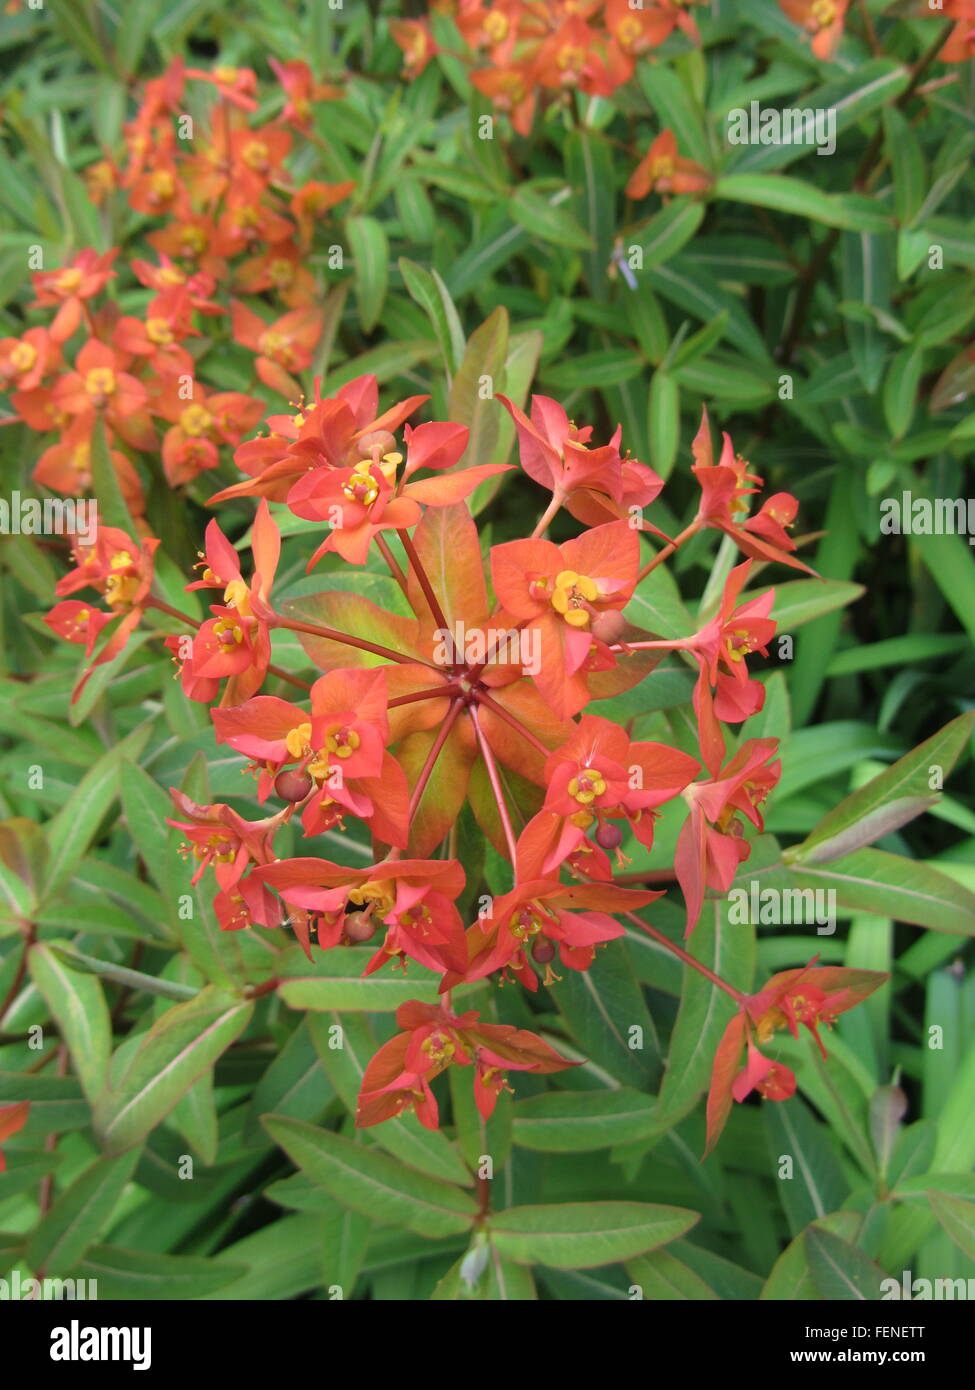 Euphorbia griffithii, Fireglow spurge plant showing bright red orange flowers and green leaves Stock Photo